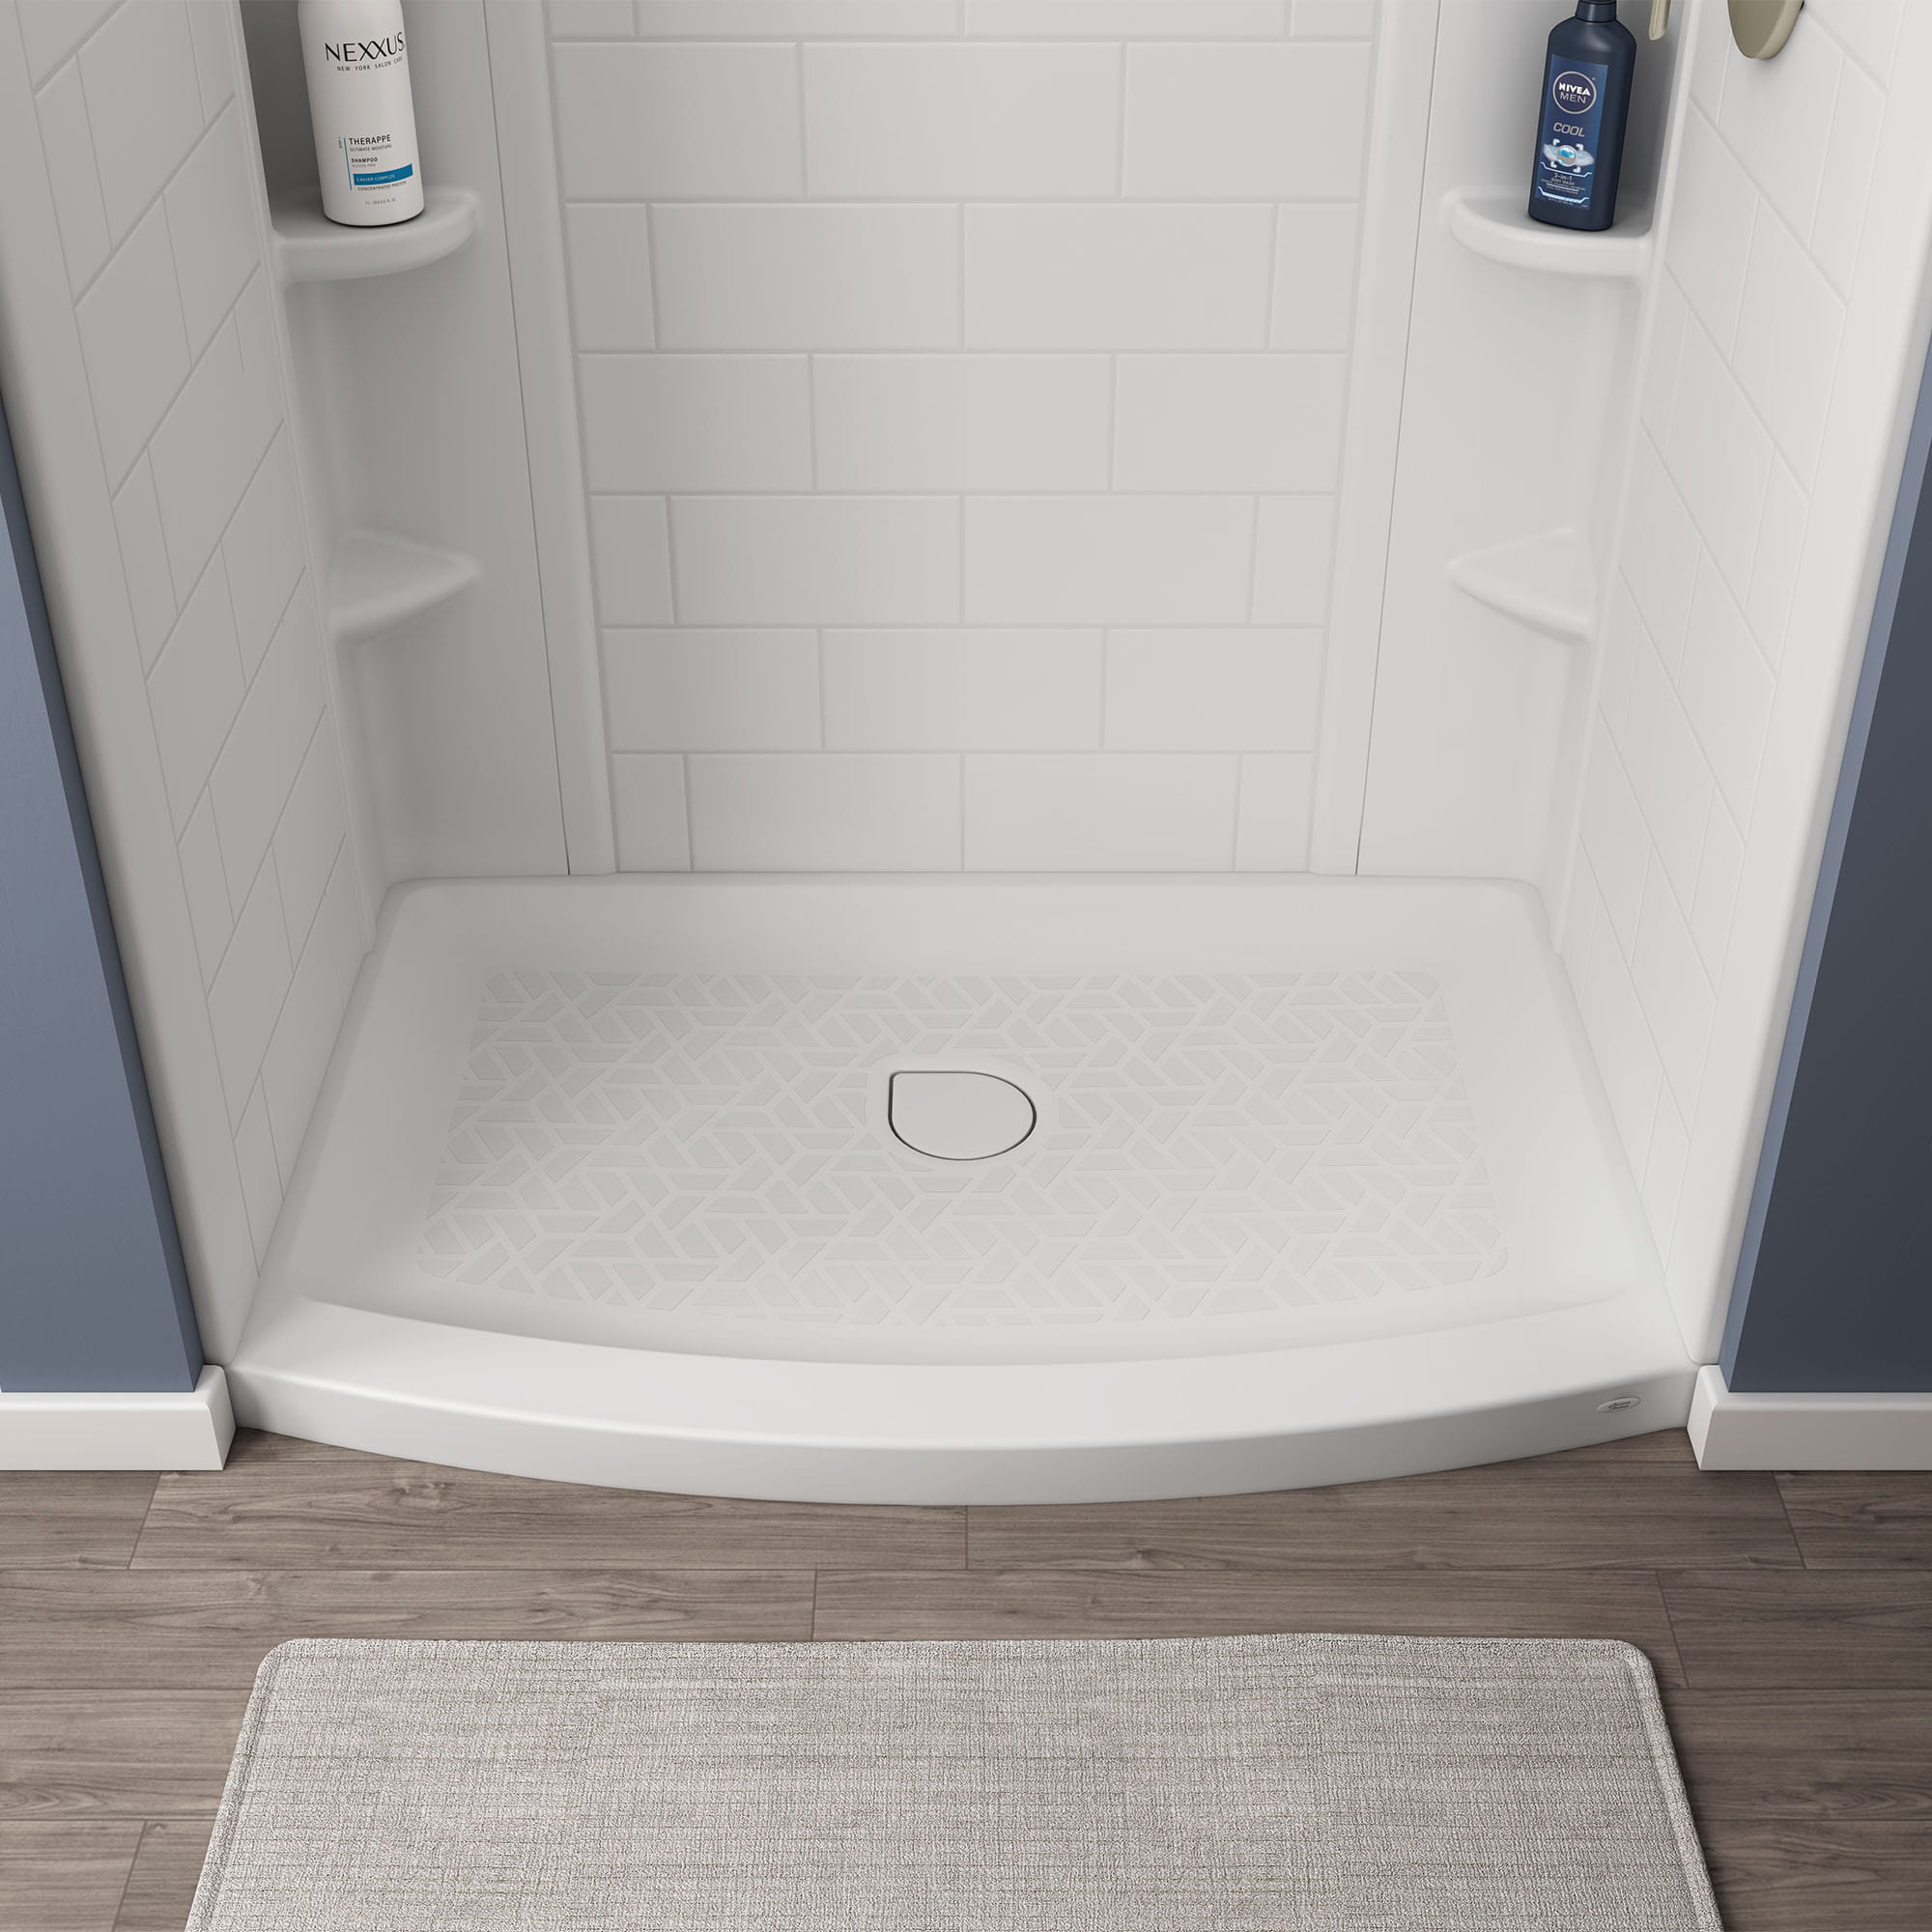 Ovation Curve 48x30 Inch Curved Shower Base With Center Drain Outlet